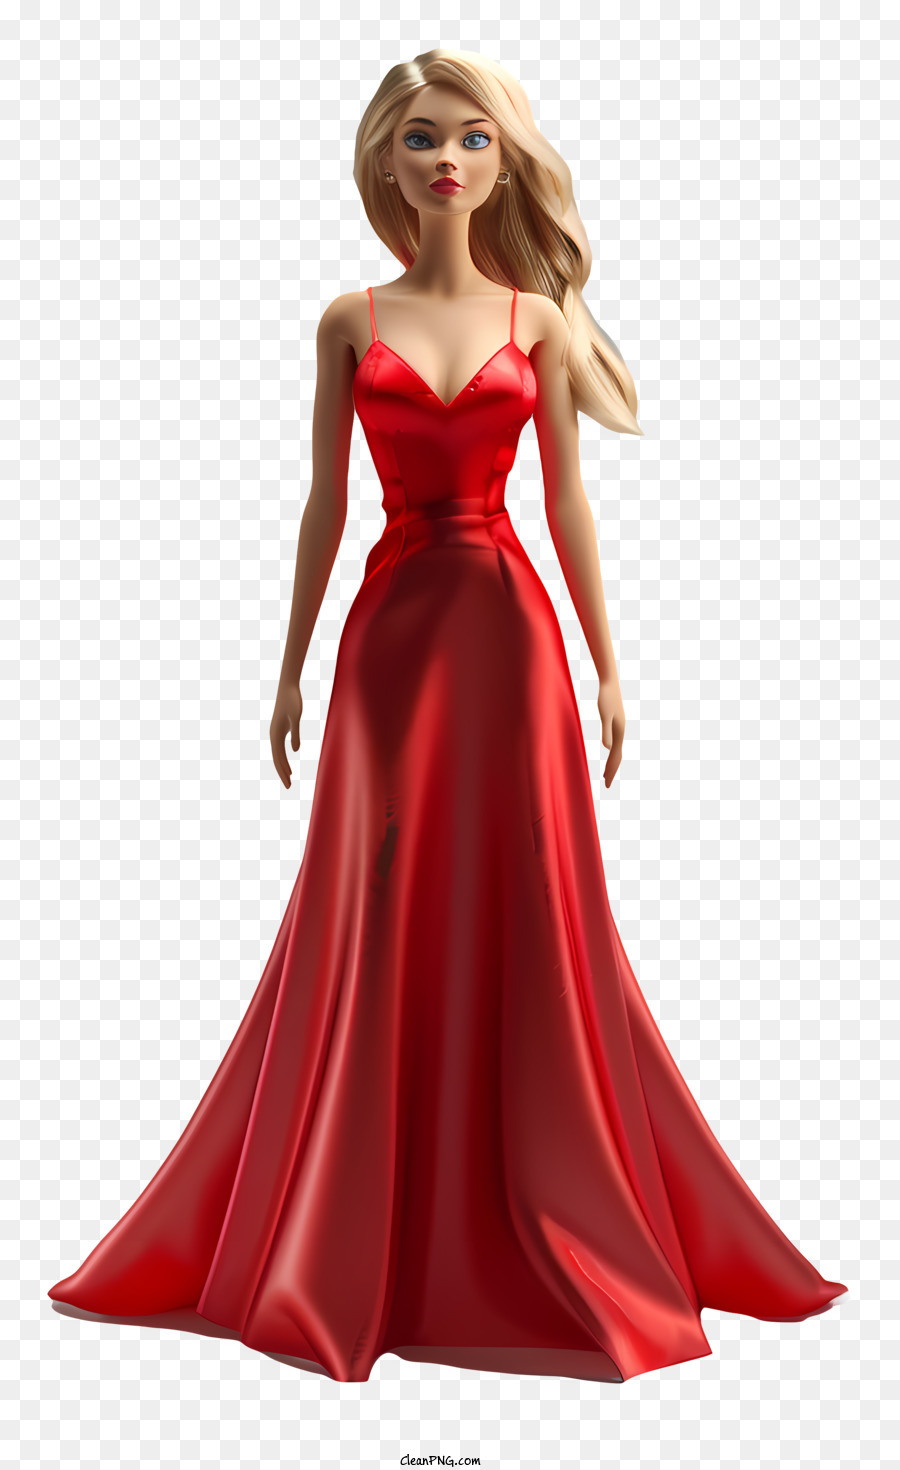 Buy Barbie Dress Gown Online In India - Etsy India